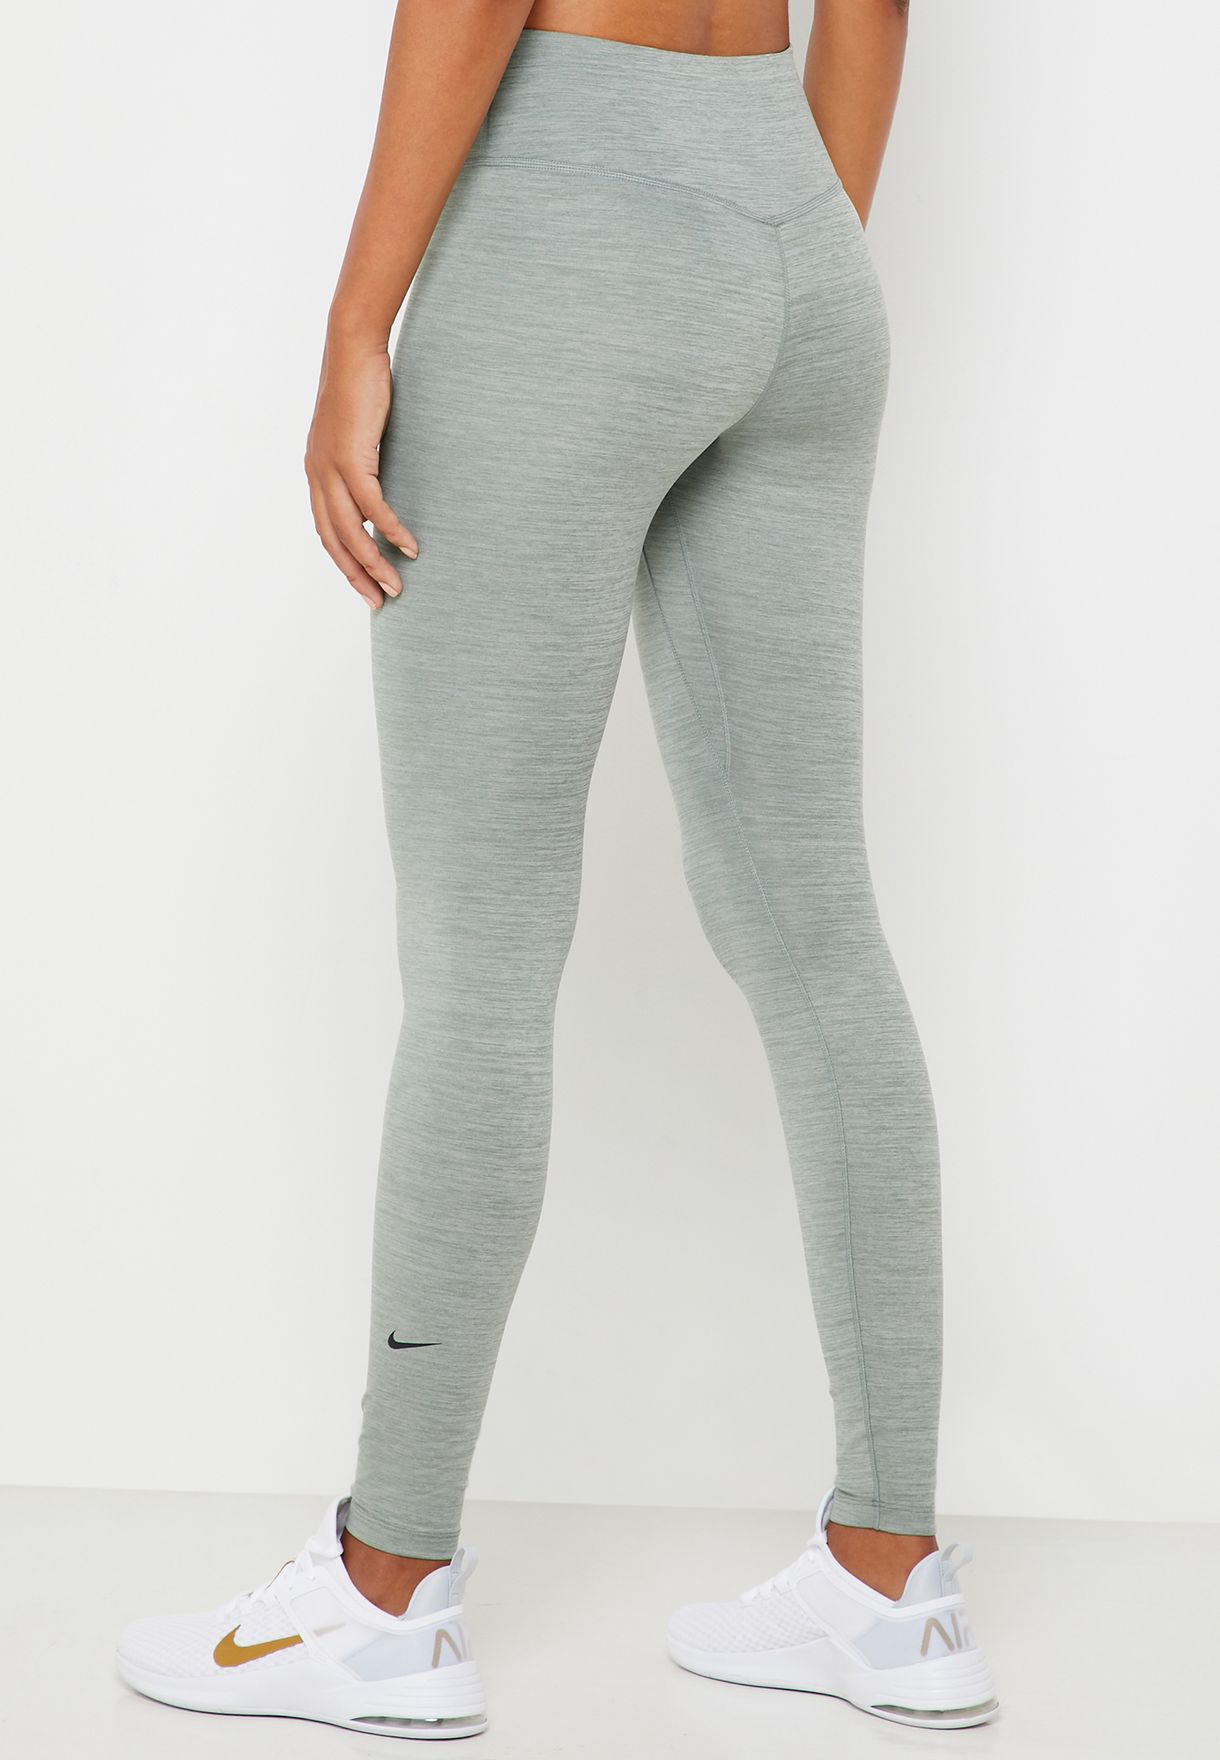 Buy Nike grey All-In Tights for Women 